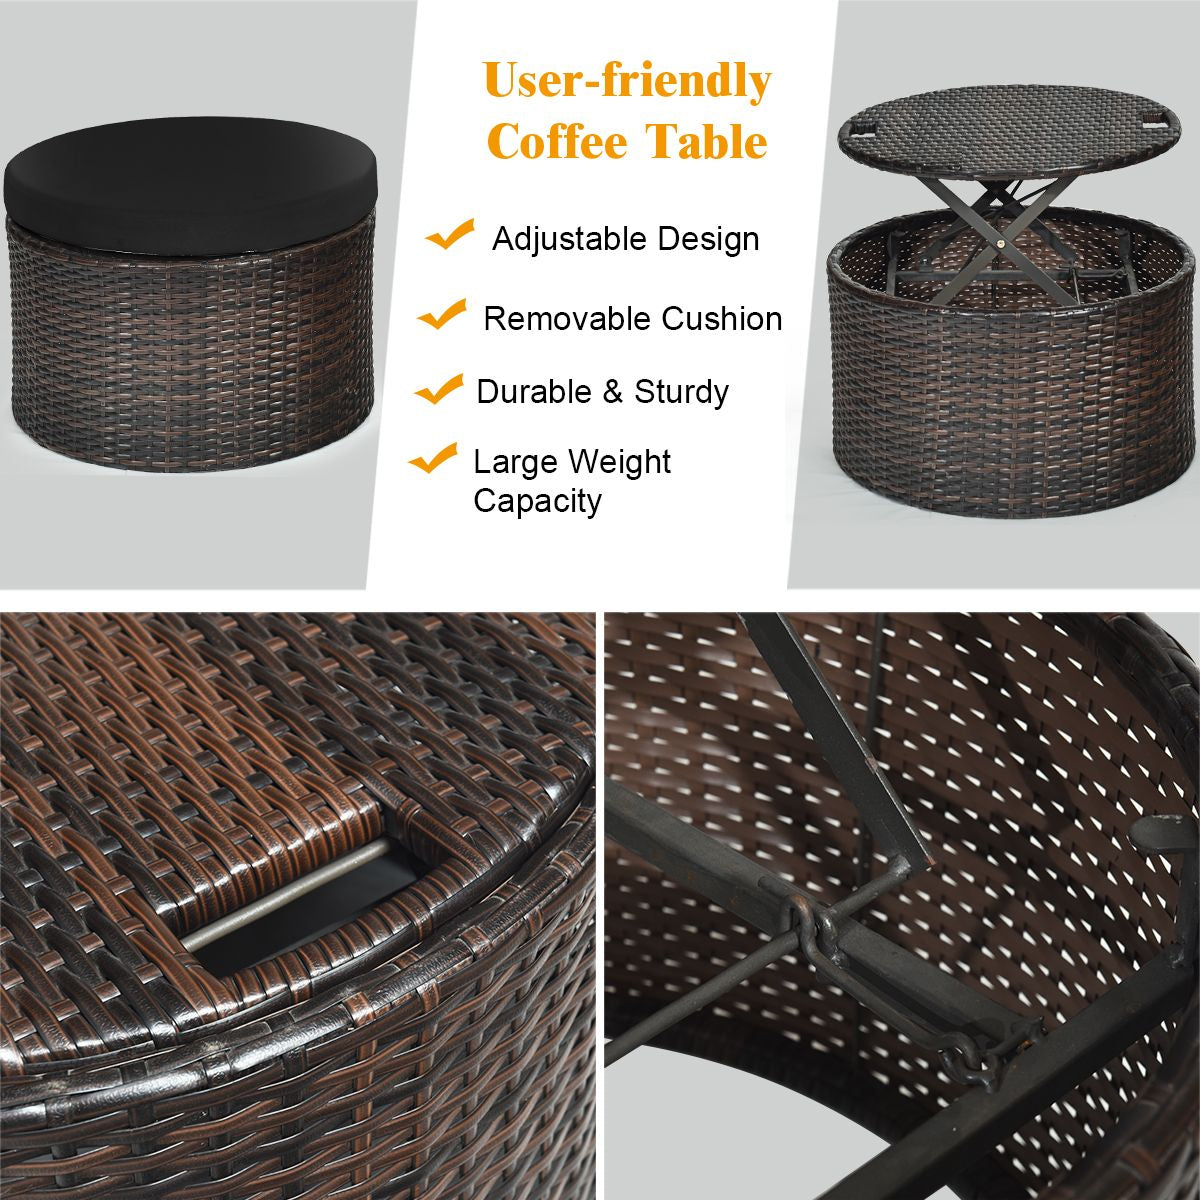 Outdoor Wicker Daybed, Patio round Sectional Furniture Set